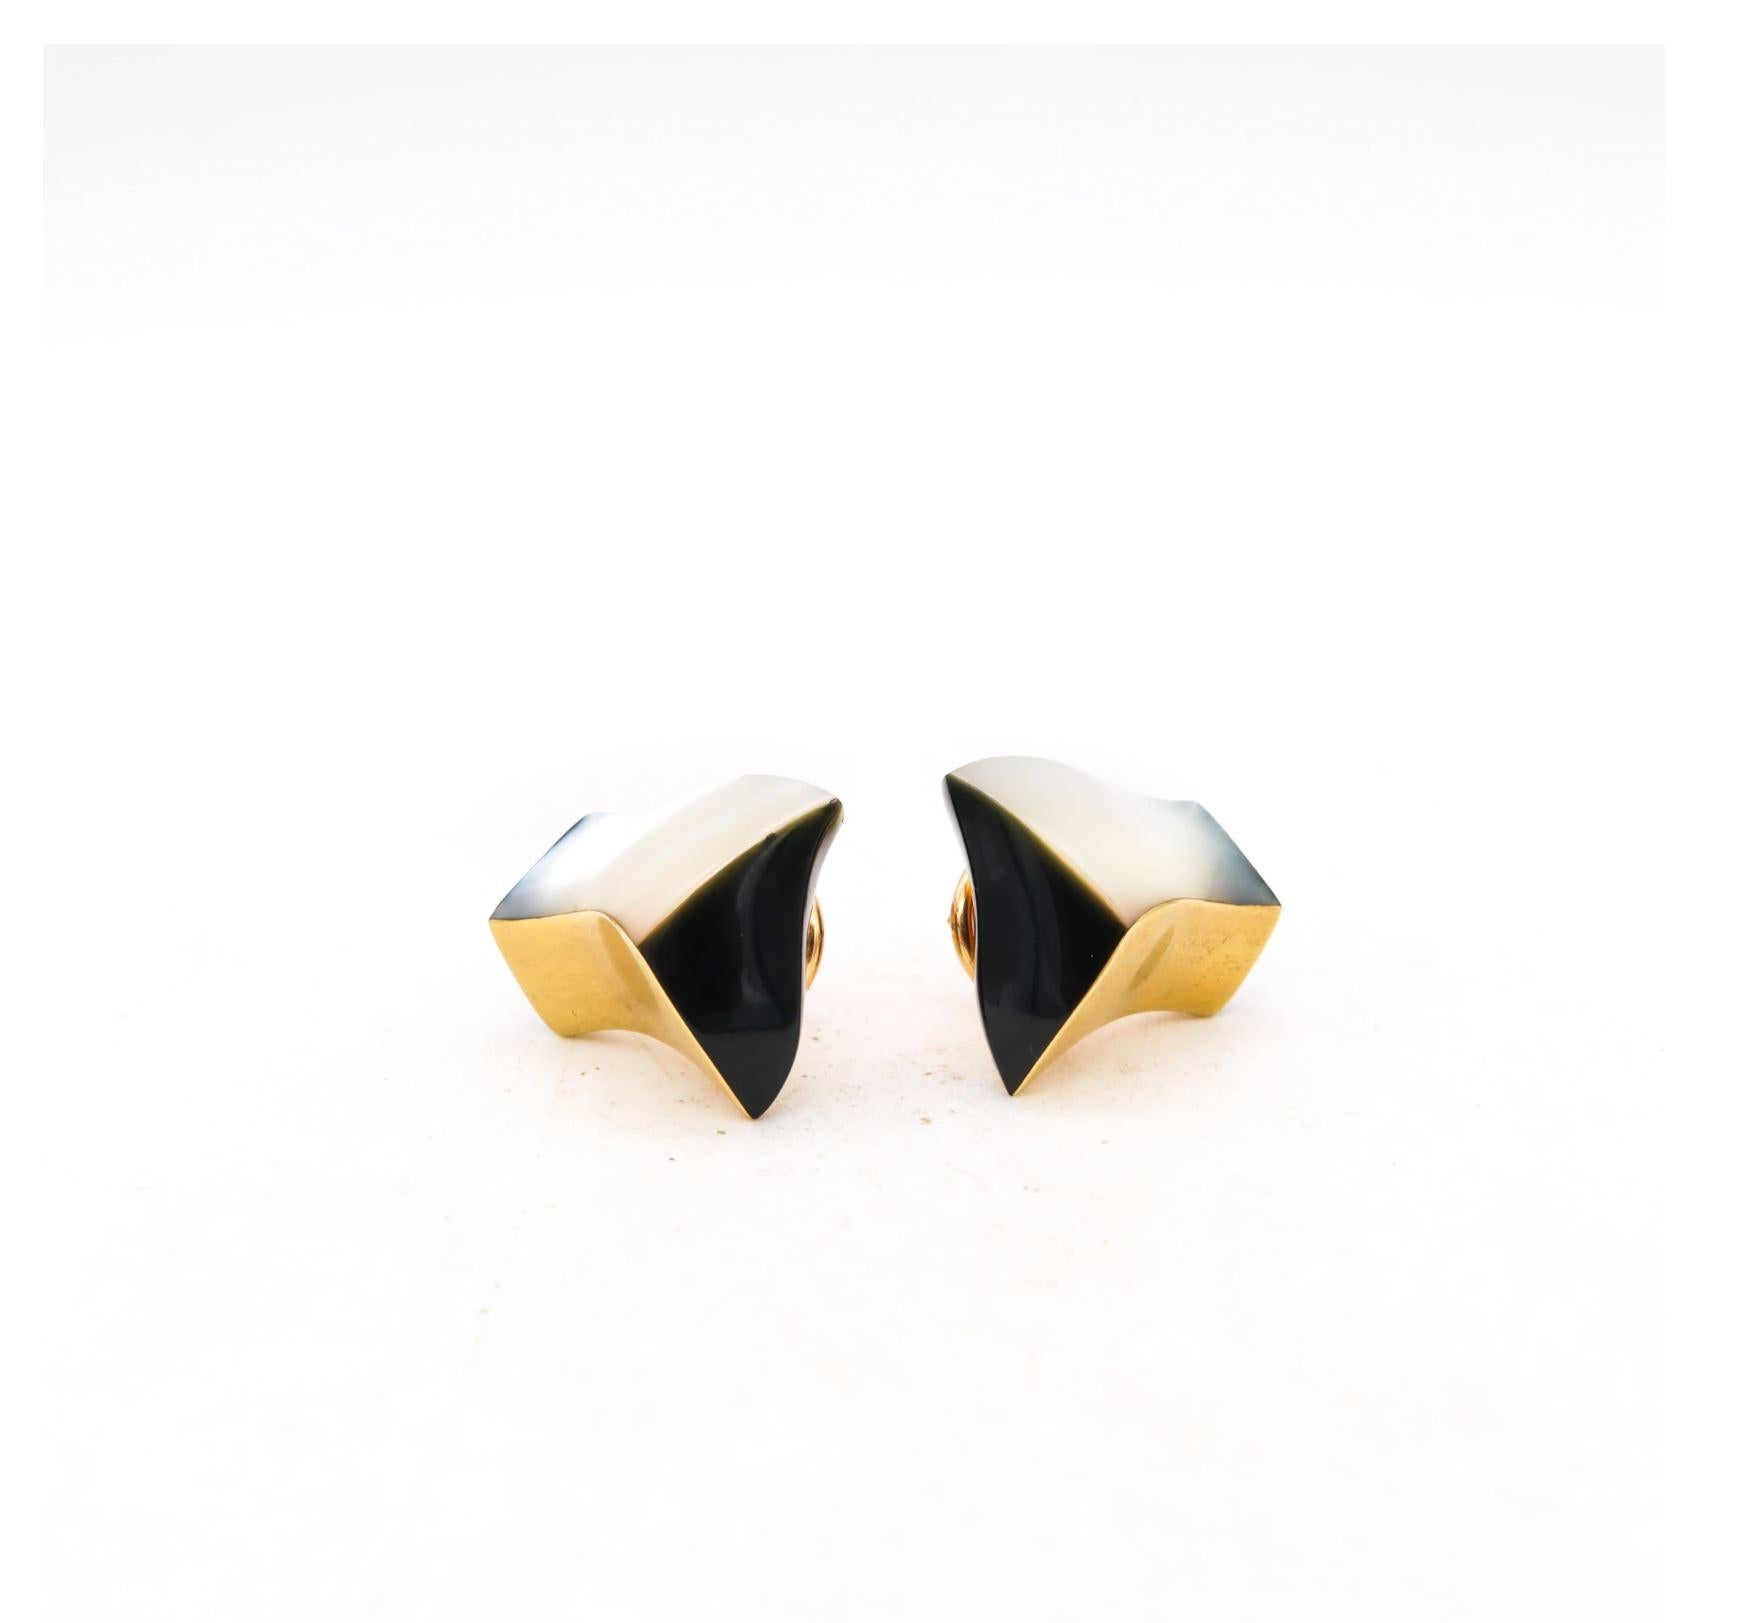 Geometric earrings designed by Angela Cummings.

Very rare and beautiful three-dimensional pair, created by Angela Cummings back in the very early of the 1980's. These modernist earrings has been crafted in solid yellow gold of 18 karats, with high